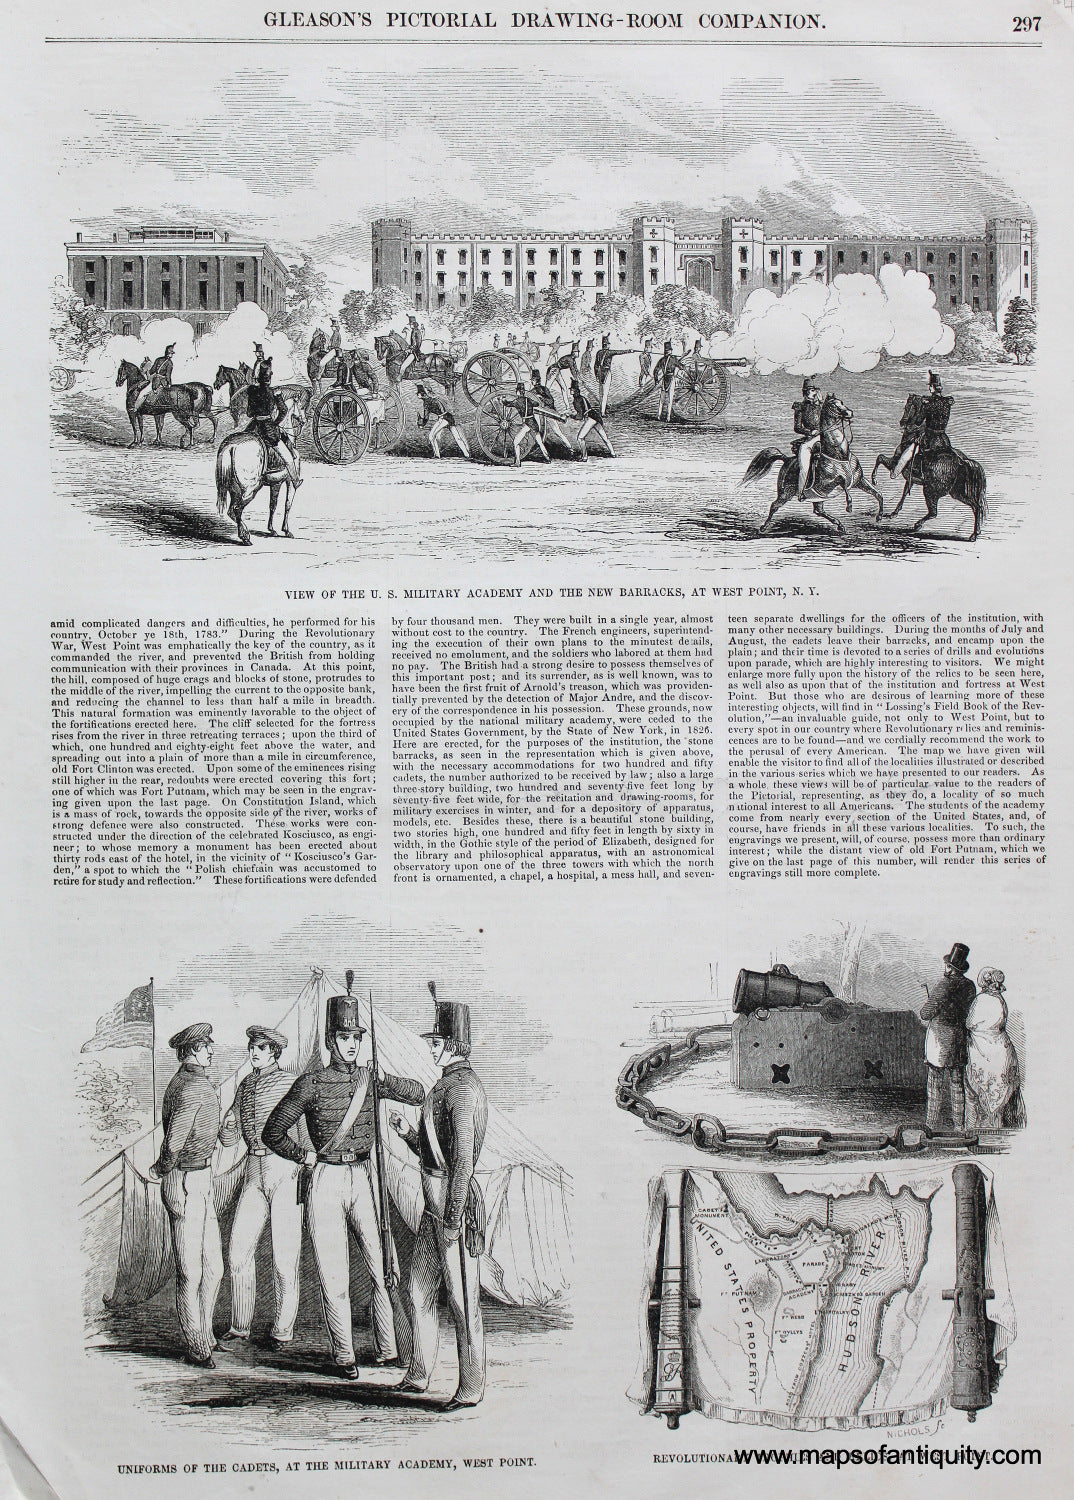 Antique-Black-and-White-Print-West-Point-Academy-Uniforms-Trophies-and-Relics-**********-College-Prints-West-Point-1853-Gleason's-Pictorial-Drawing-Room-Companion-Maps-Of-Antiquity